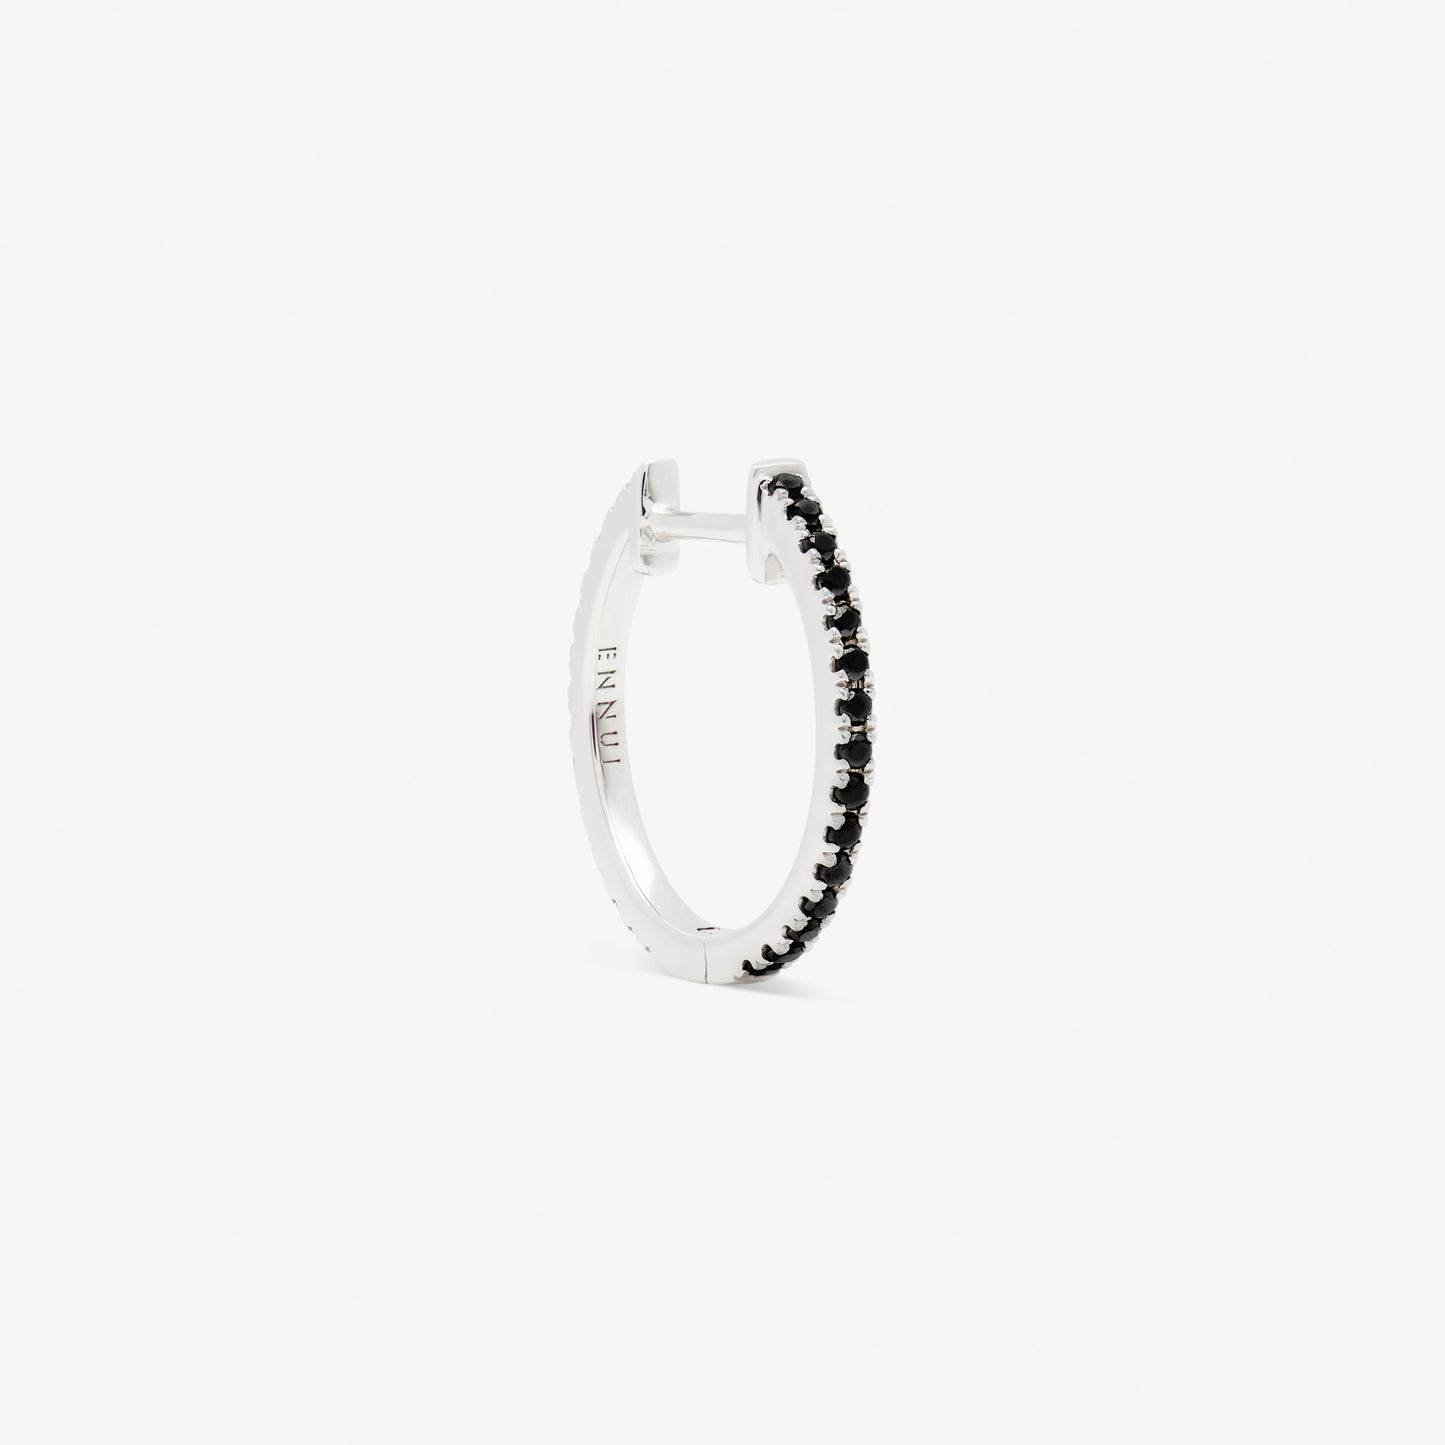 14mm hoop with balck and white diamonds set in white gold